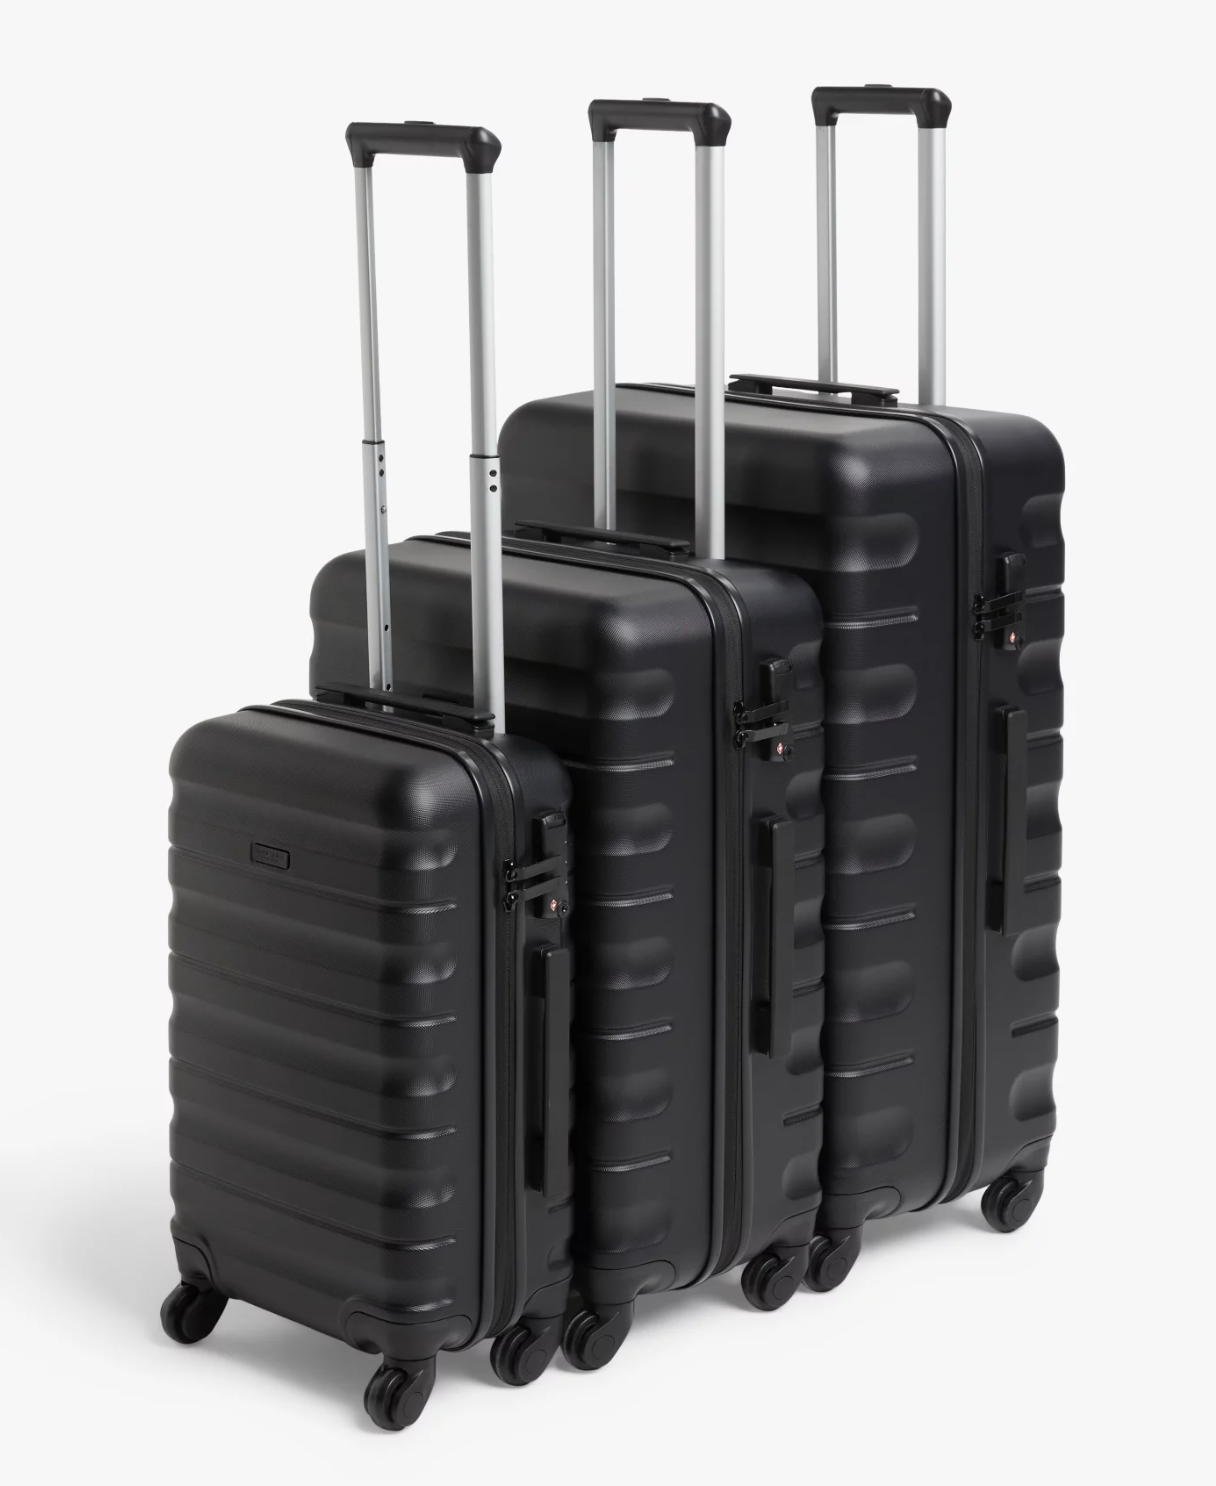 The suitcase also comes in a medium and large size if you want to whole set, but currently the biggest design isn't available. (John Lewis)